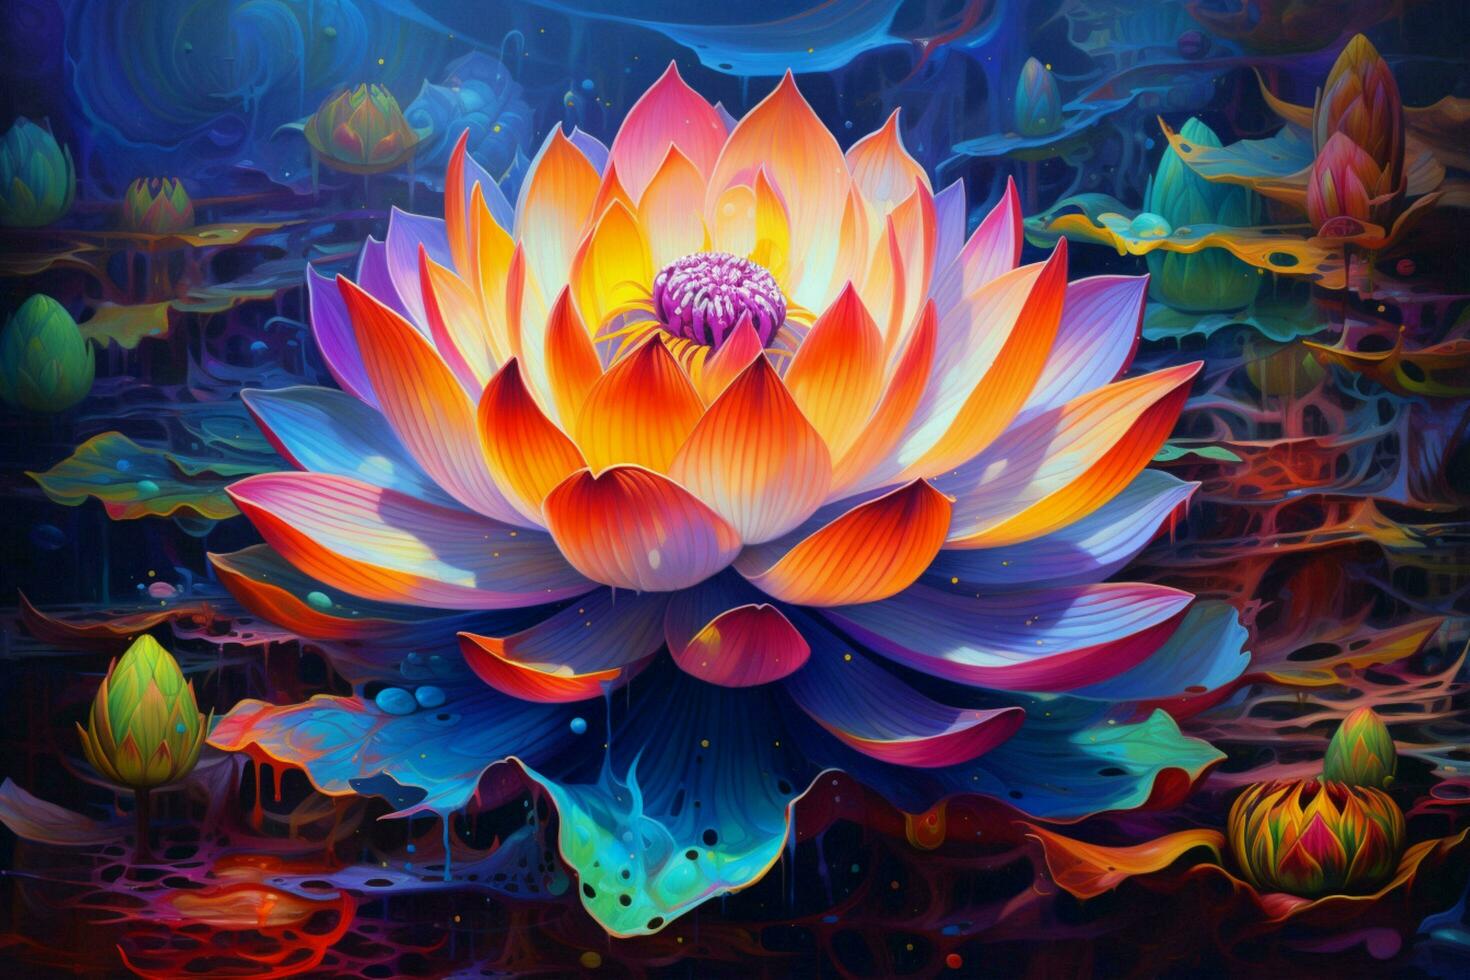 this artwork depicts a colorful lotus flower in f photo